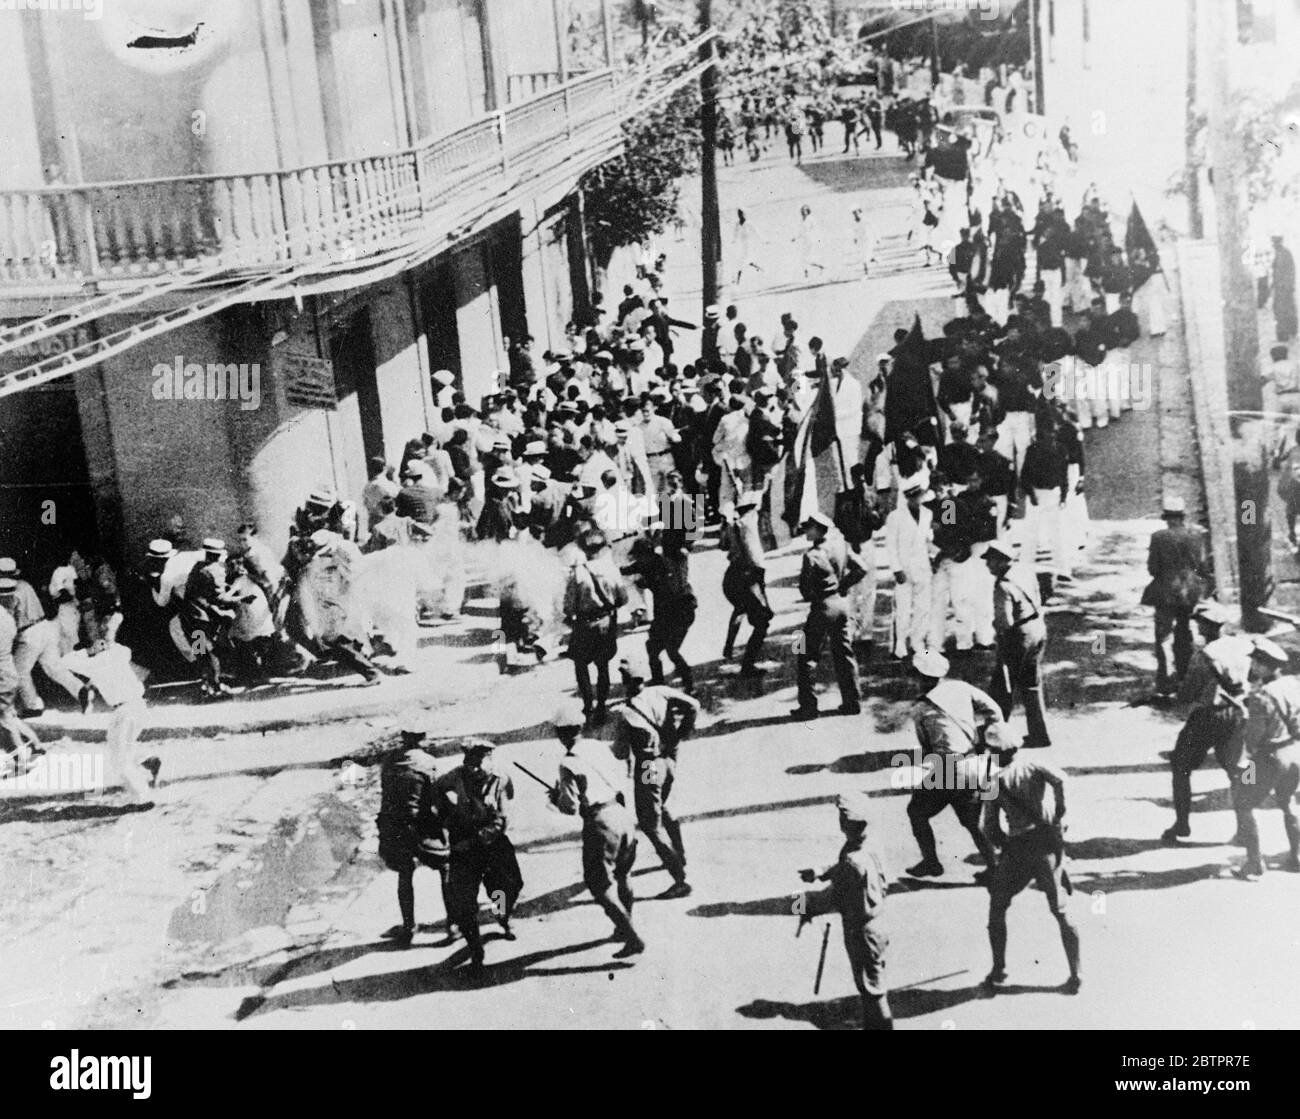 20 killed in 'massacre'. This picture, made in Ponce, Porto Rico, West Indies dependency of the United States, shows the first shots fired in the writing, in which 20 people were killed, when police clashed with members of the Nationalist Party. A policeman who can be seen, although his gun is hidden by another figure, is firing towards a group of fleeing people. Cadets of the Nationalist party are motionless, but girl nurses can be seen running across the street. A report issued by a committee termed the riot and resulting casualties a 'massacre'. 24 June 1937 Stock Photo